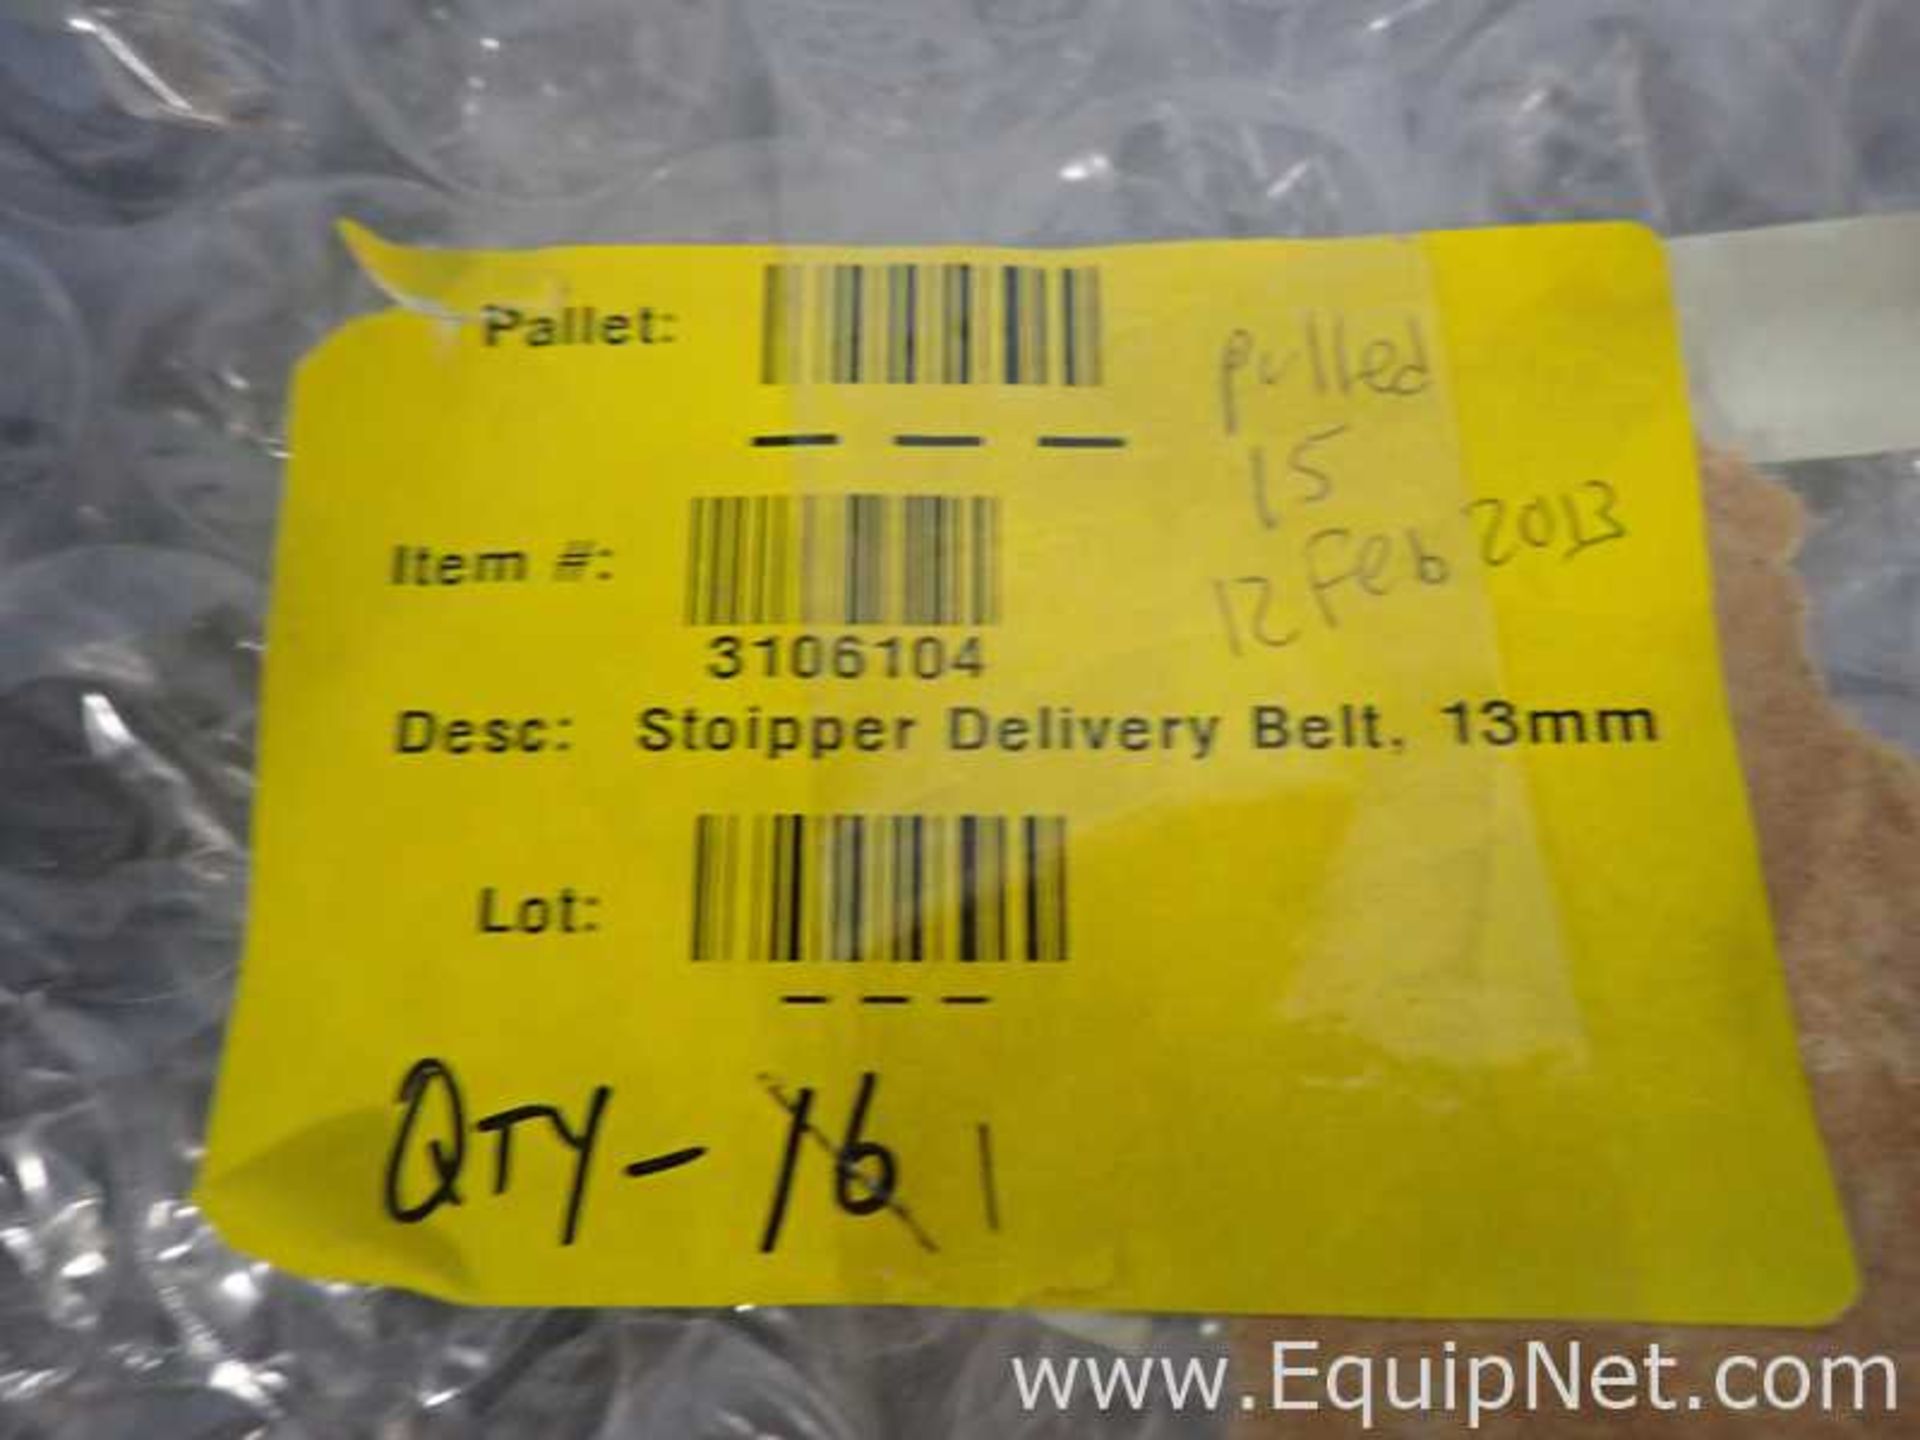 EQUIPNET LISTING #827045; REMOVAL COST: $20; DESCRIPTION: Lot of 43 Stoipper 13mm Delivery Belts - Image 4 of 6